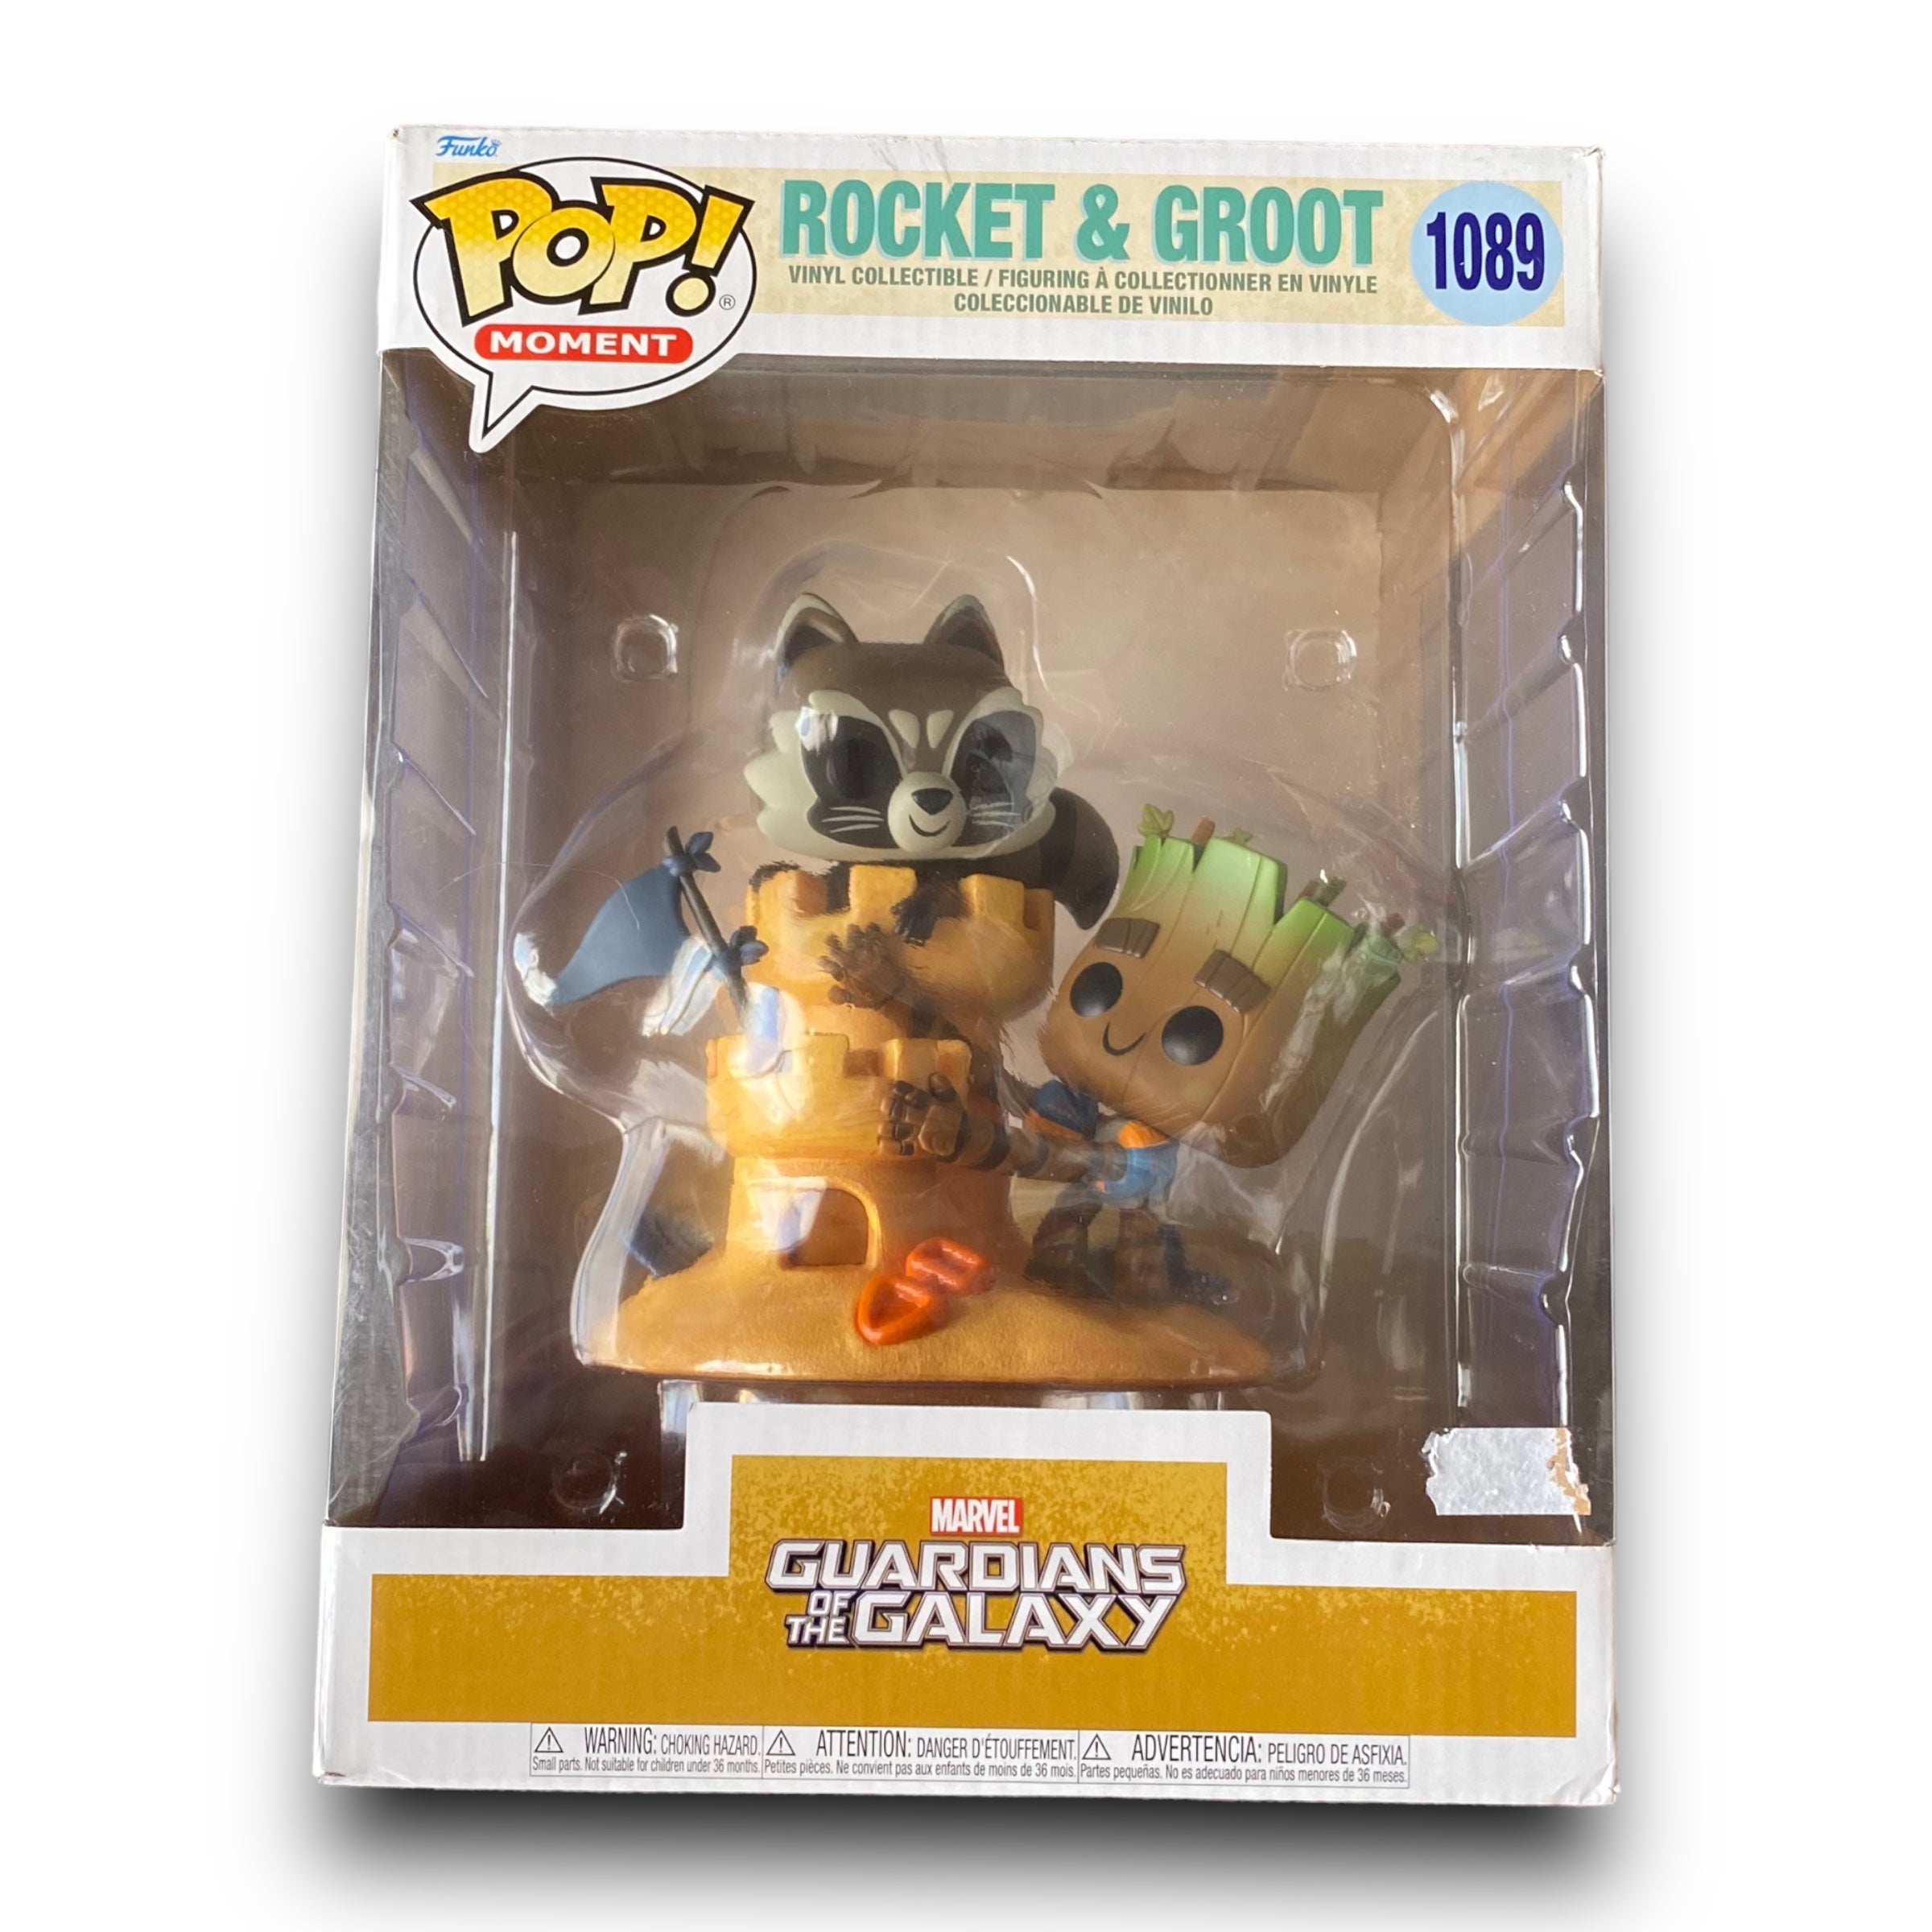 Brand New Funko Pop! Moment Rocket & Groot Marvel Guardians of the